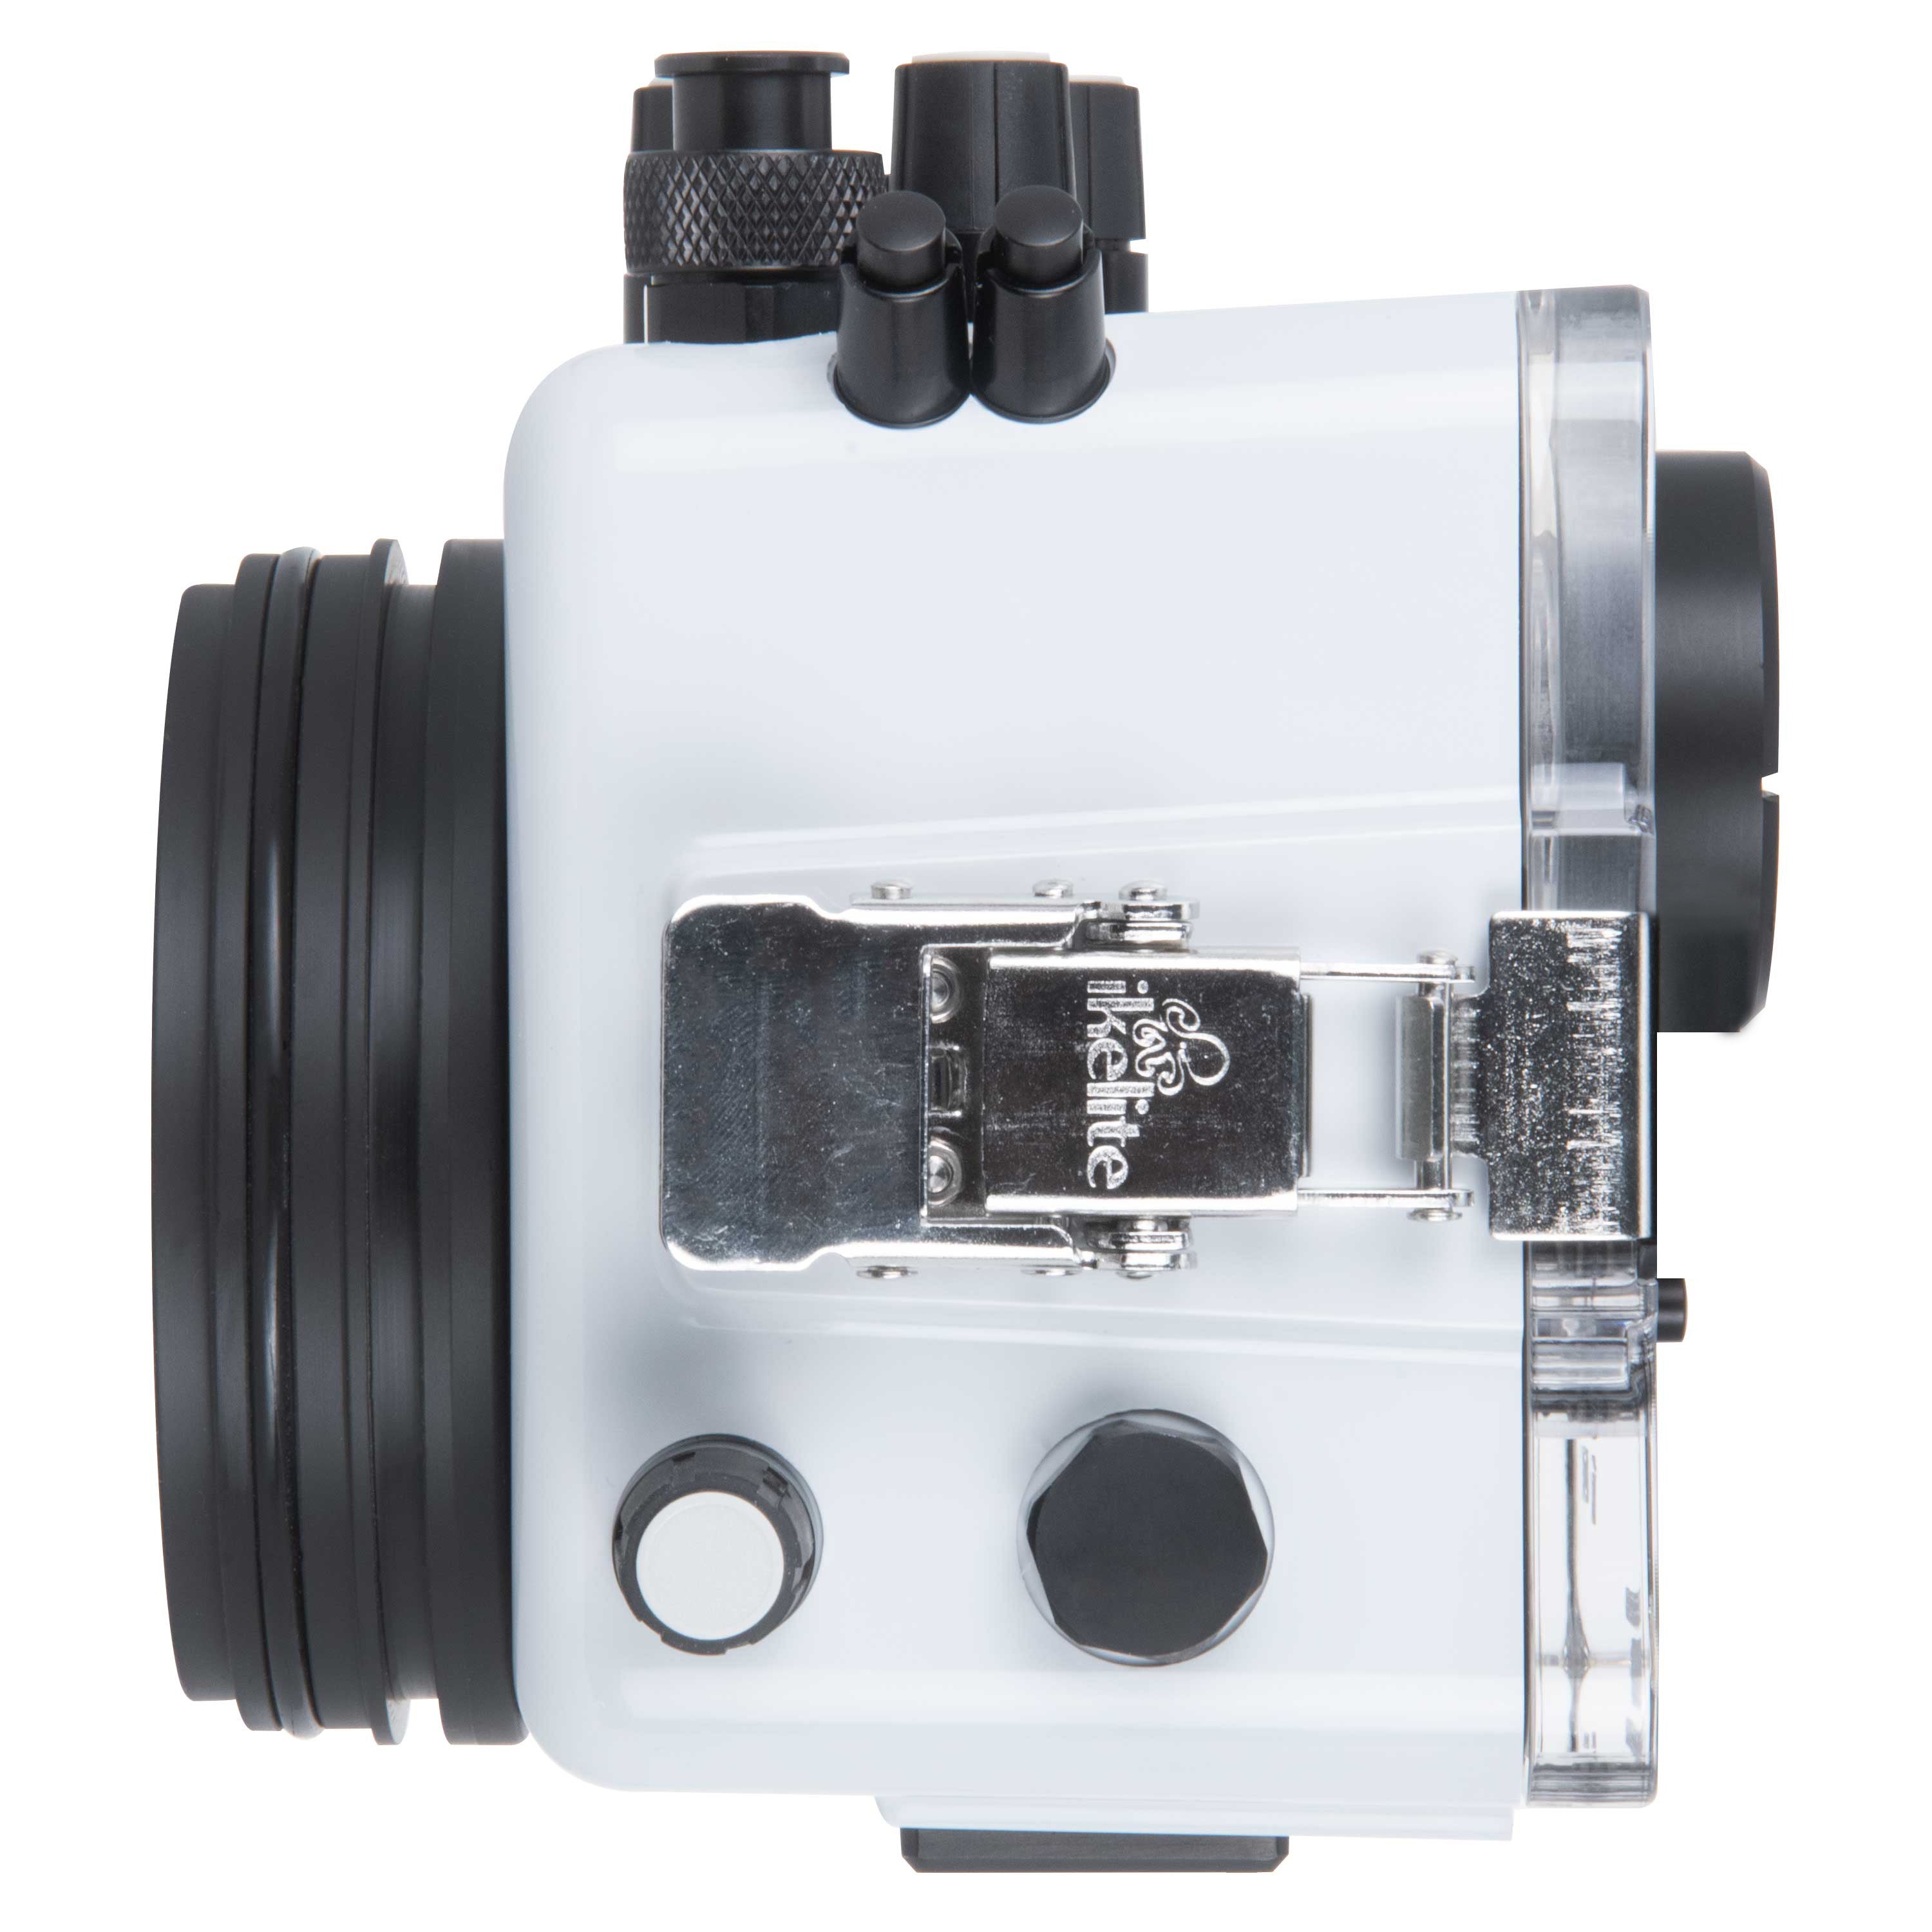 200DLM/A Underwater Housing for OM System OM-5 and Olympus OM-D E-M5 III Mirrorless Cameras